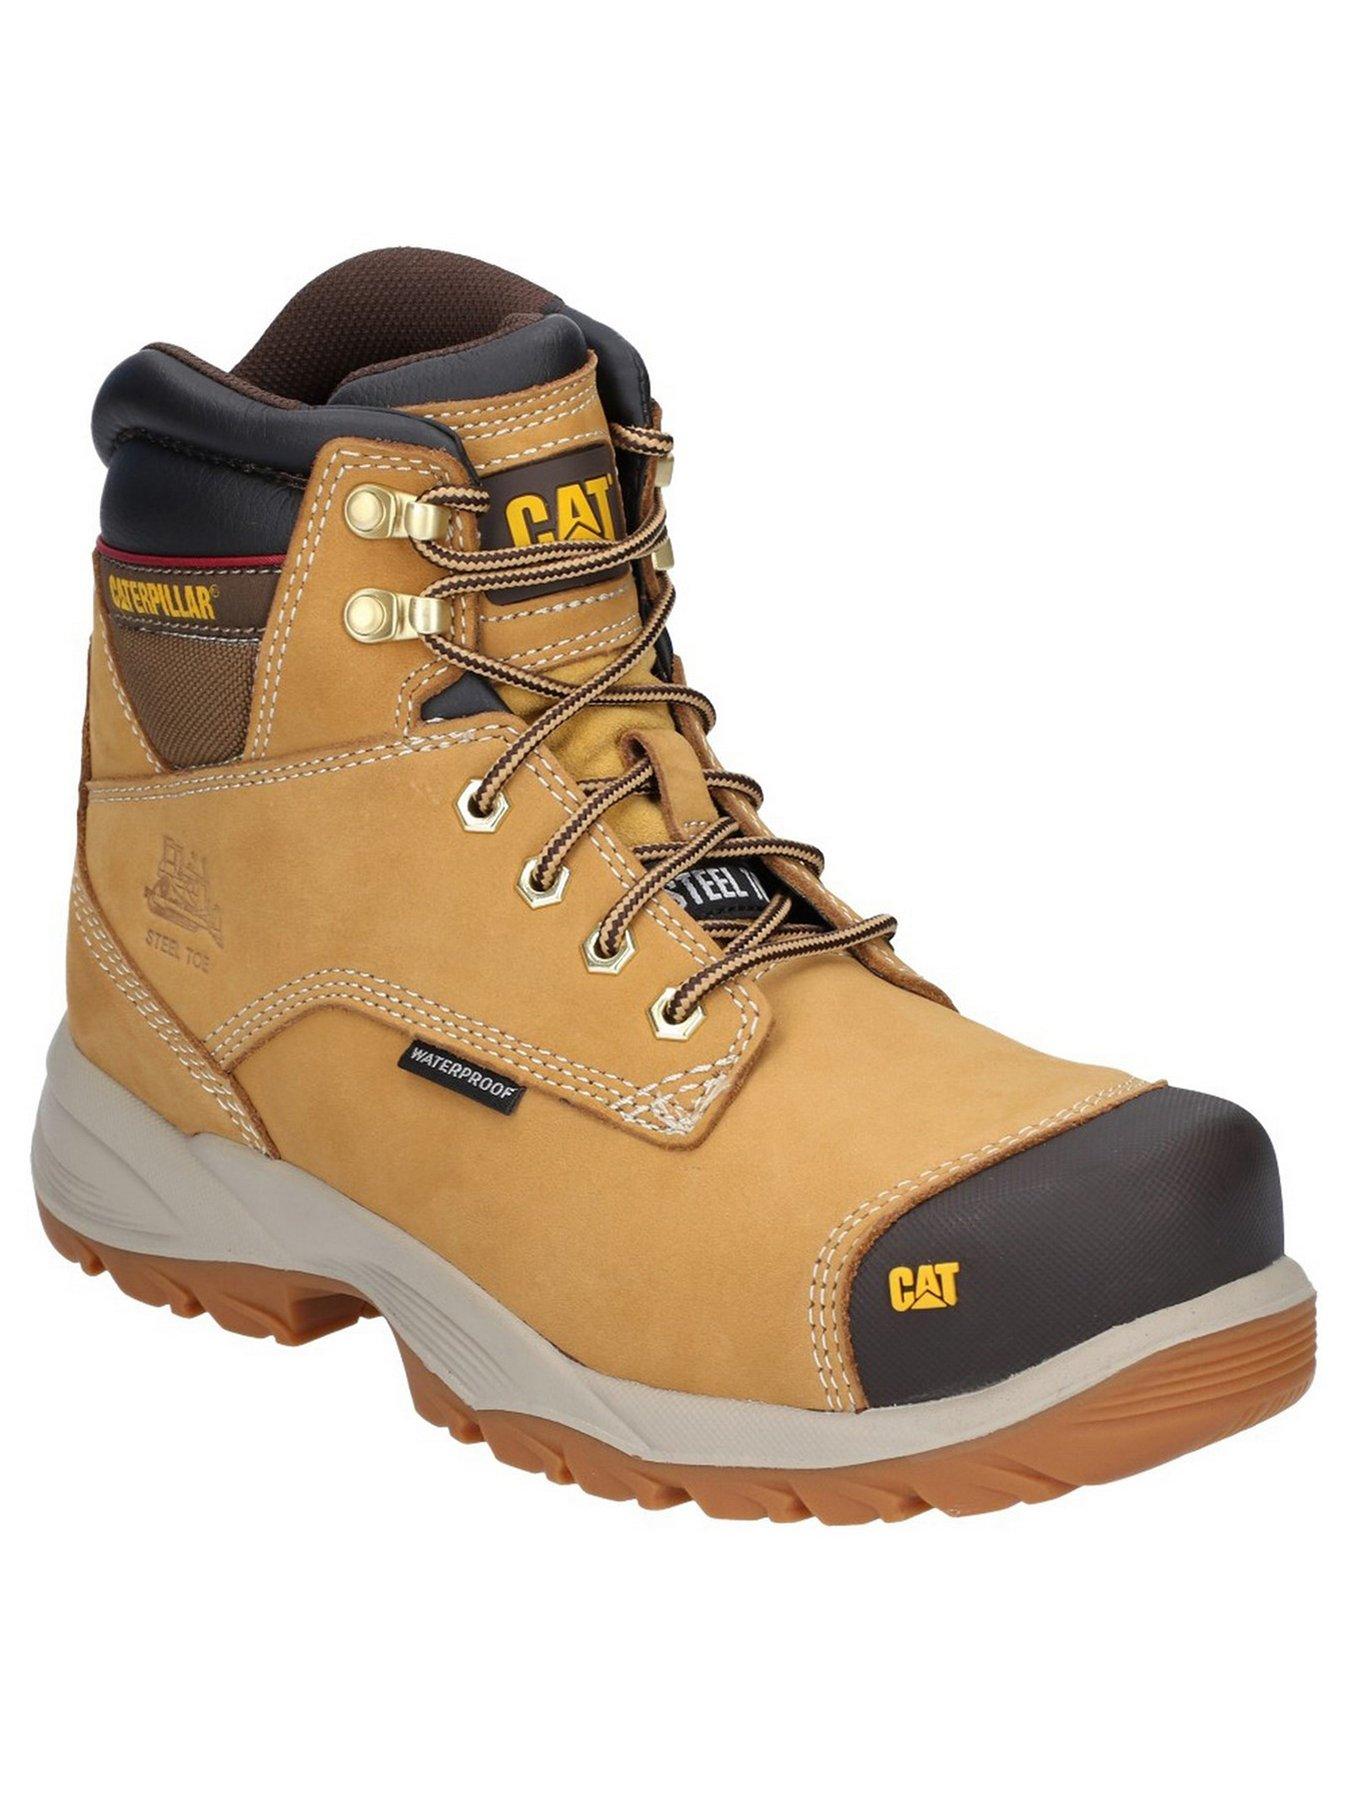 cat safety boots